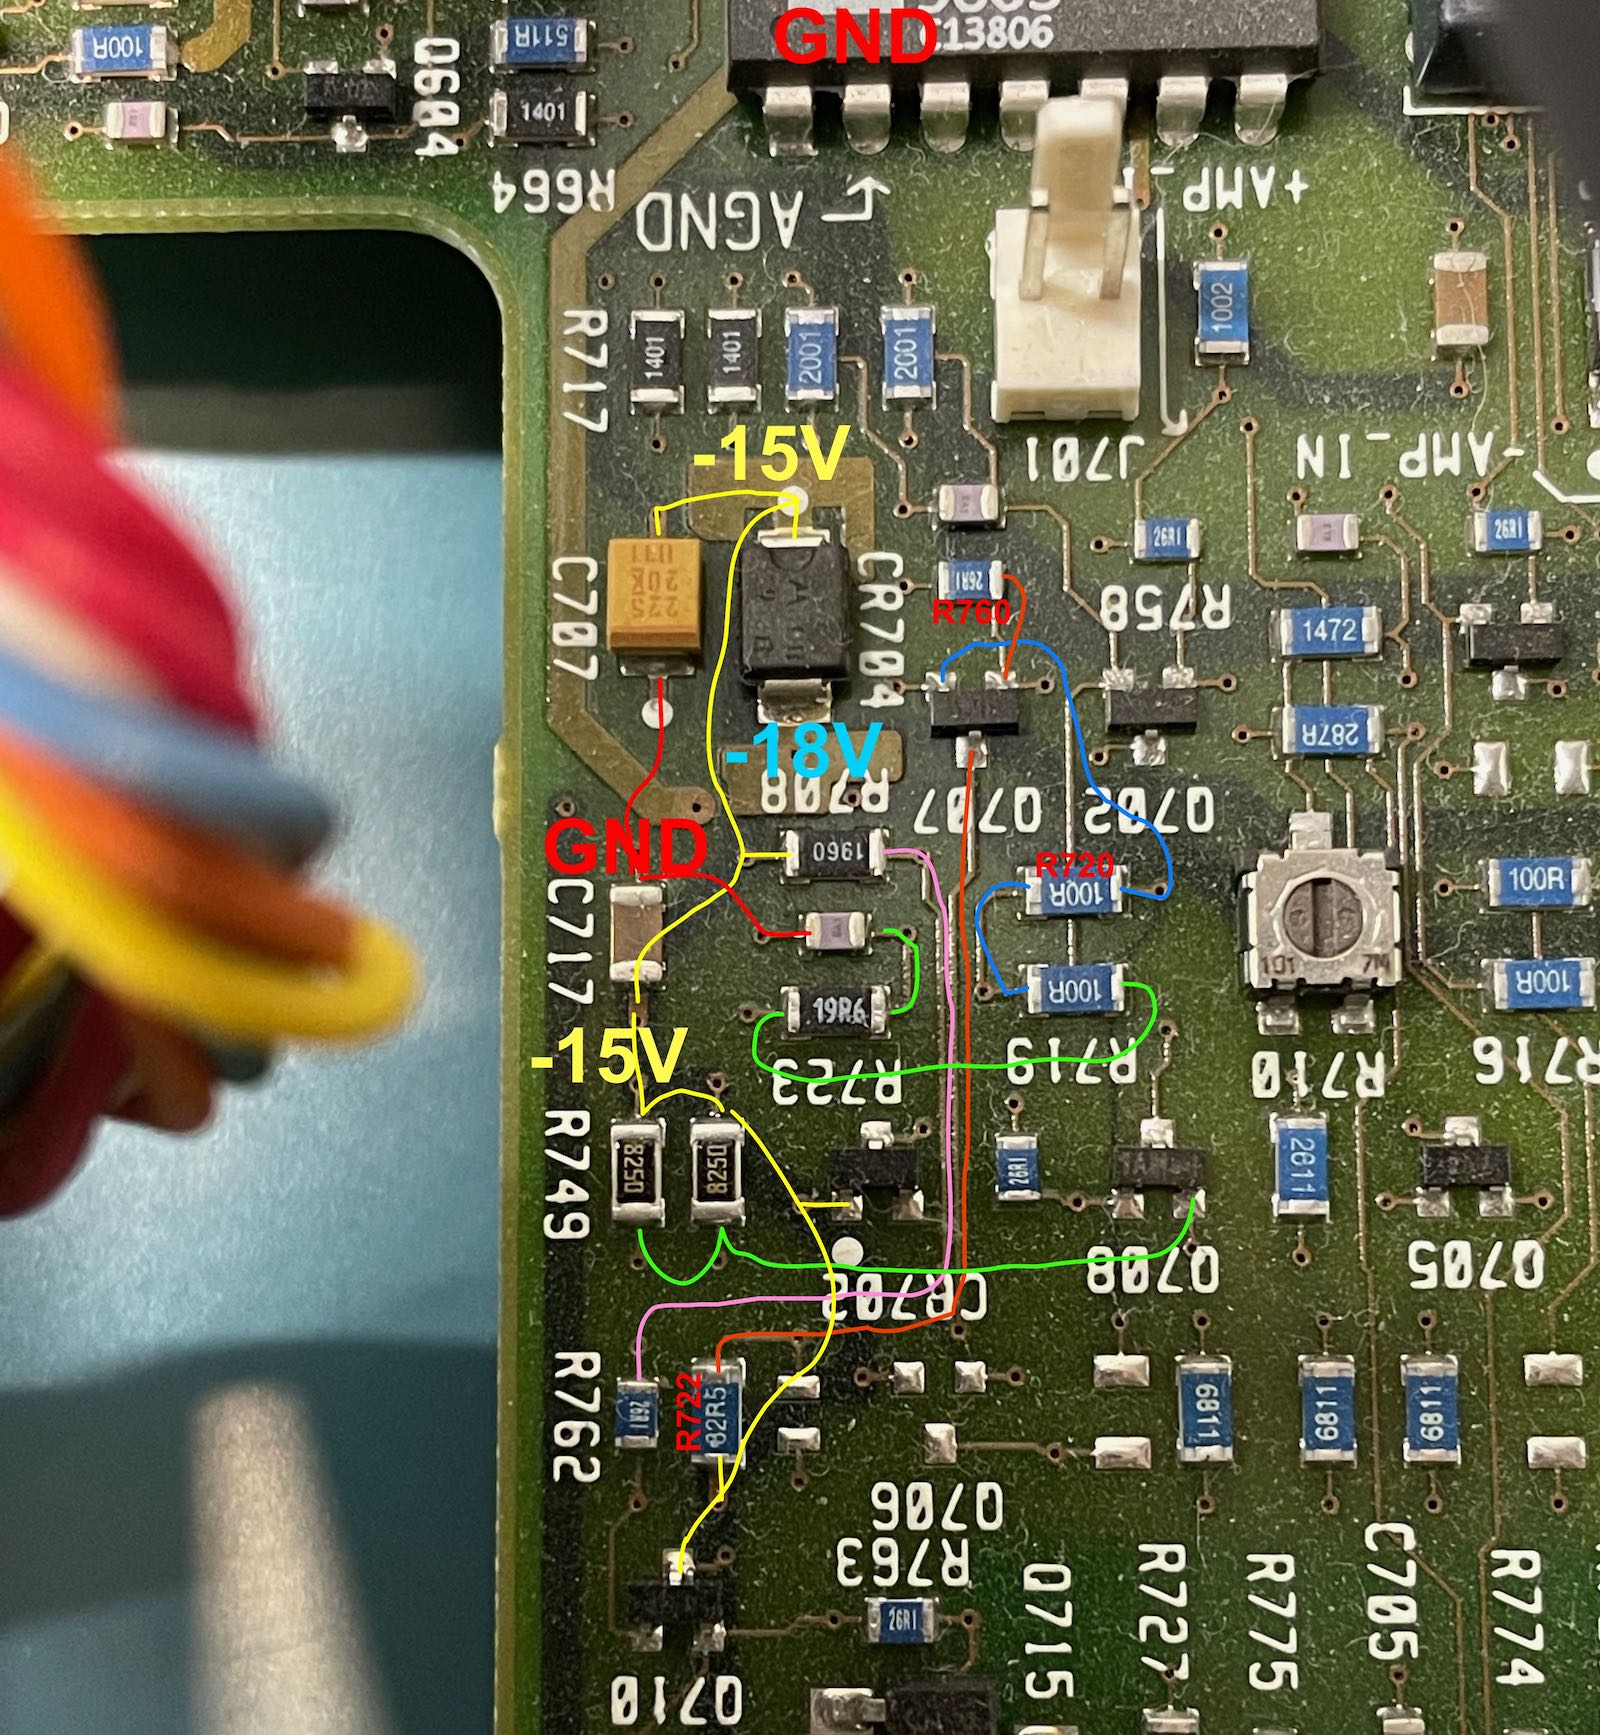 PCB annotated with component interconnections